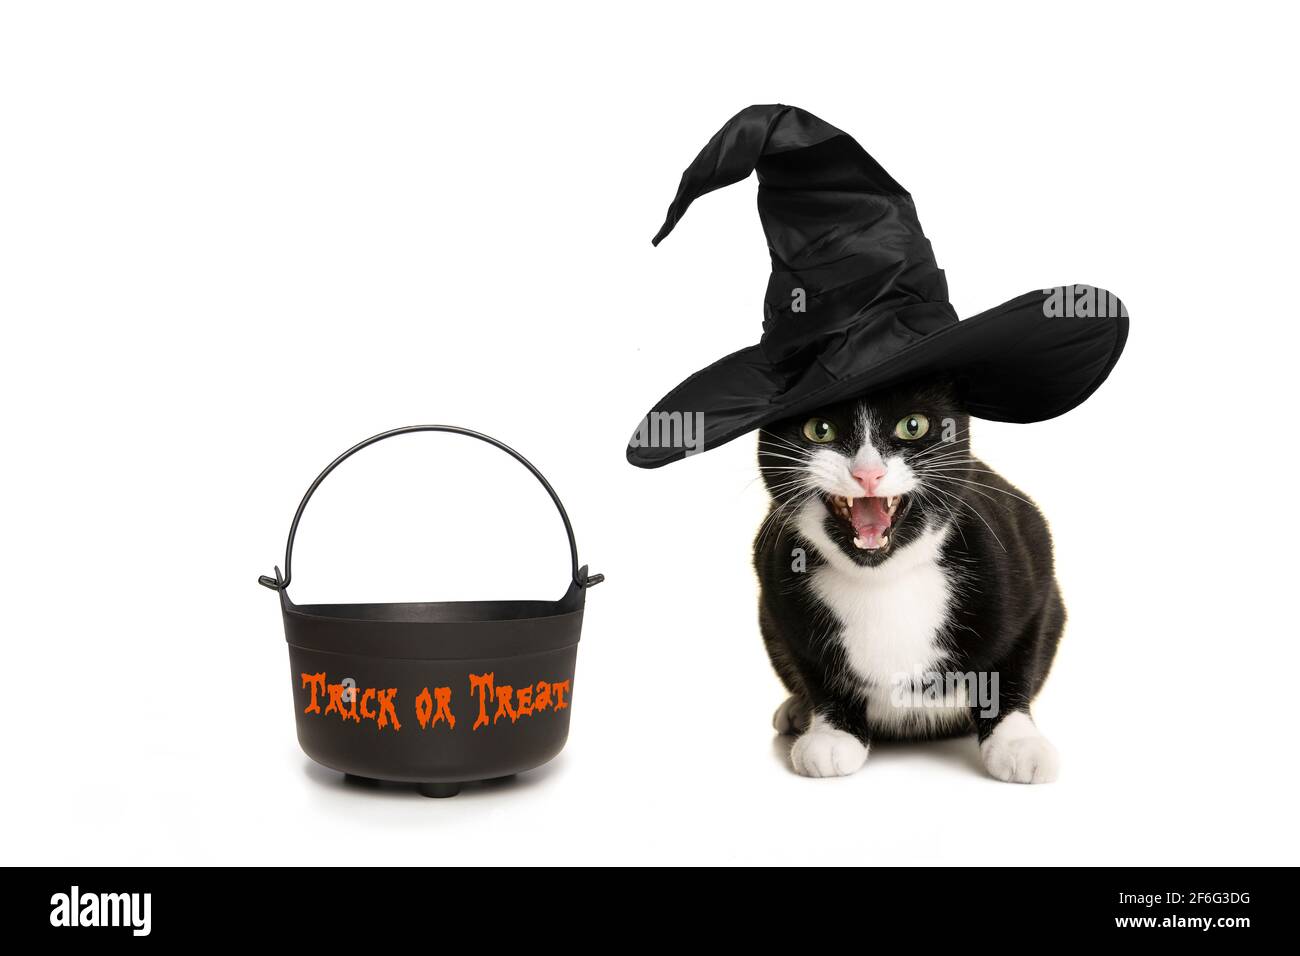 Black and white cat with witch hat and a cauldron asking for trick or treat during halloween, isolated on a white background Stock Photo